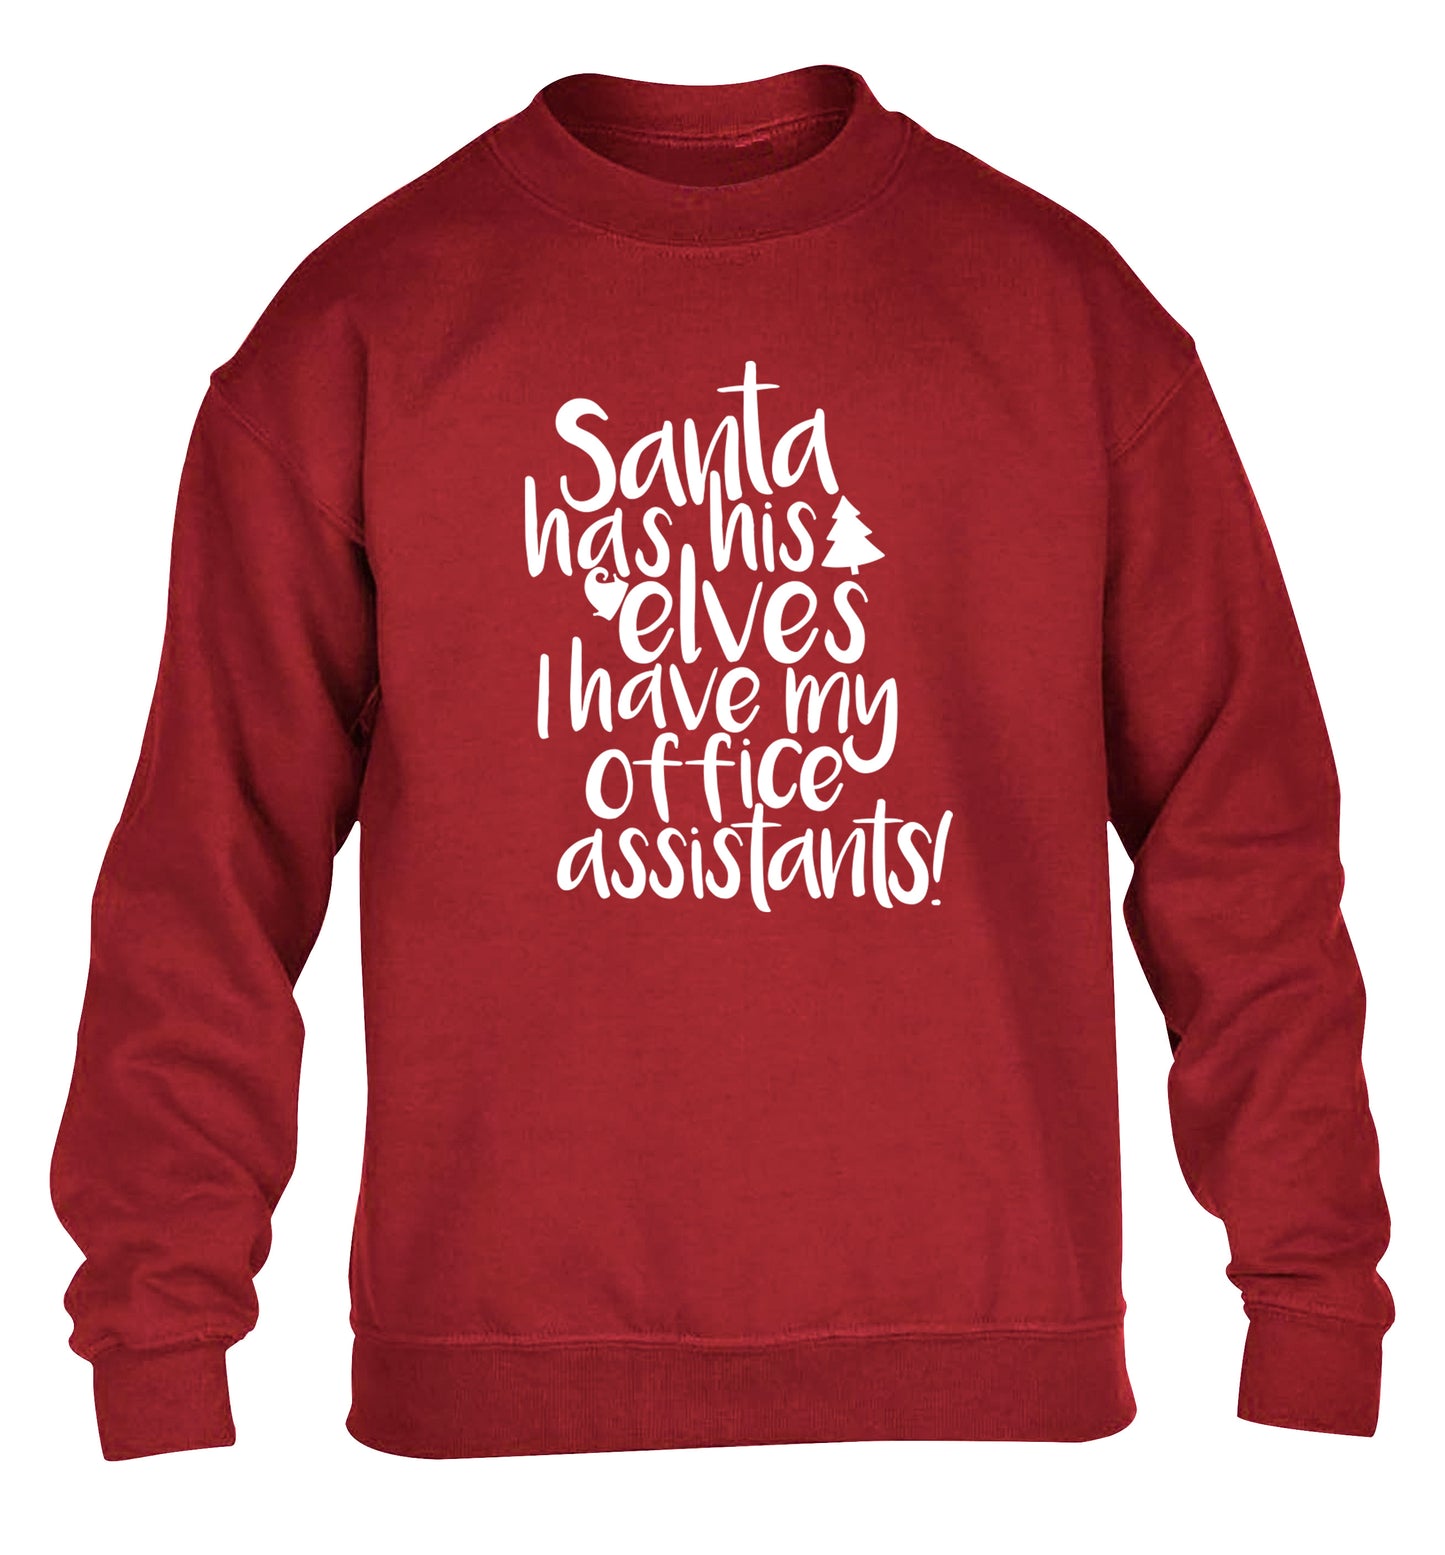 Santa has elves I have office assistants children's grey sweater 12-13 Years